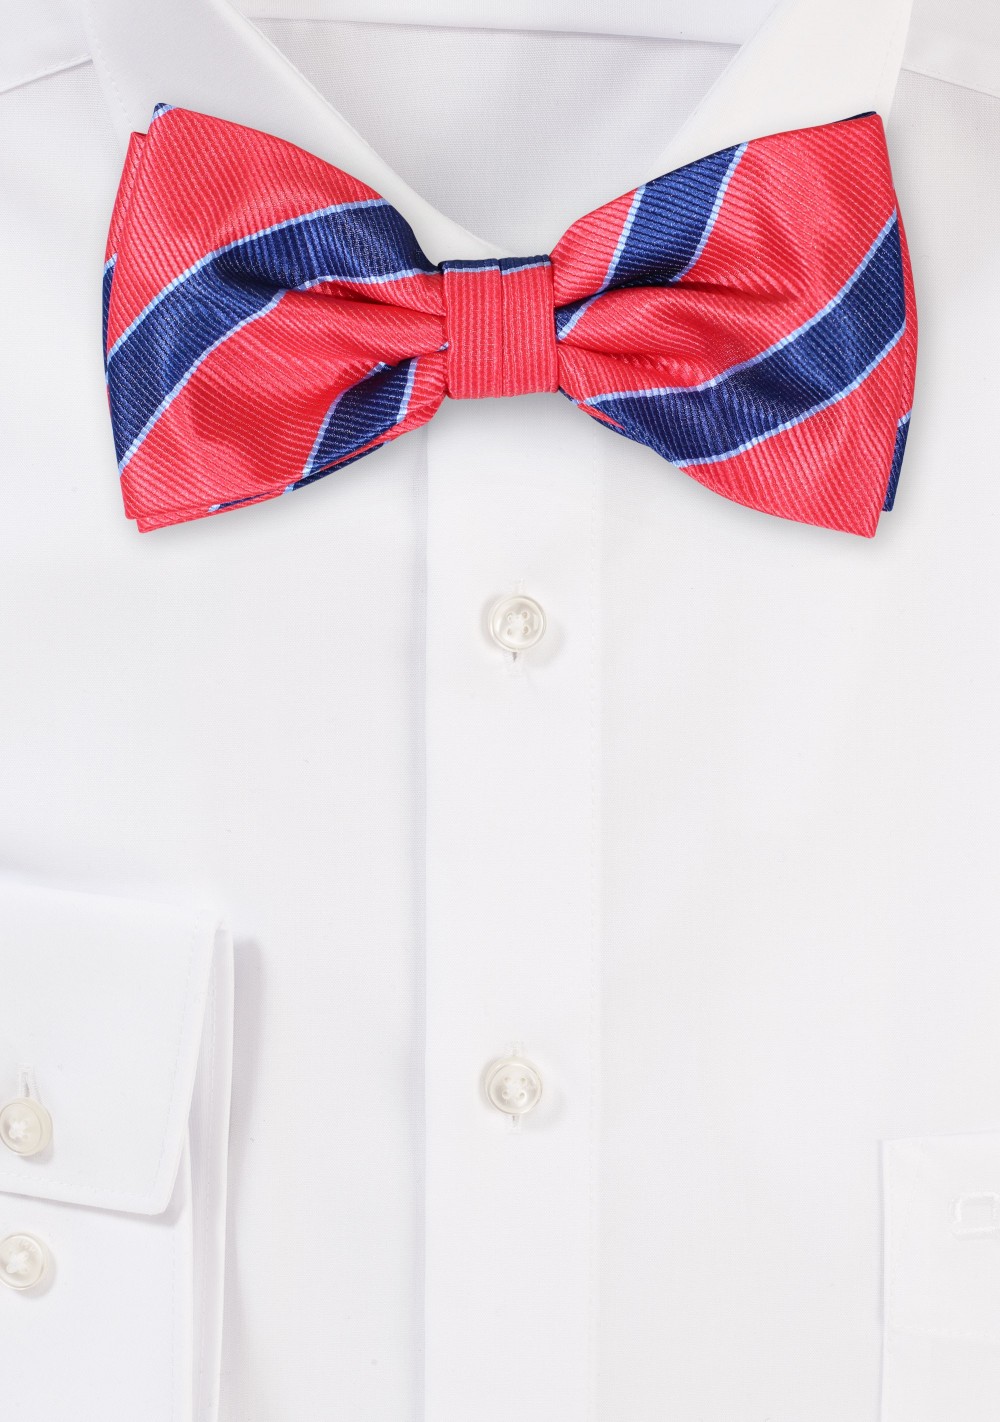 Coral Red and Navy Striped Bowtie